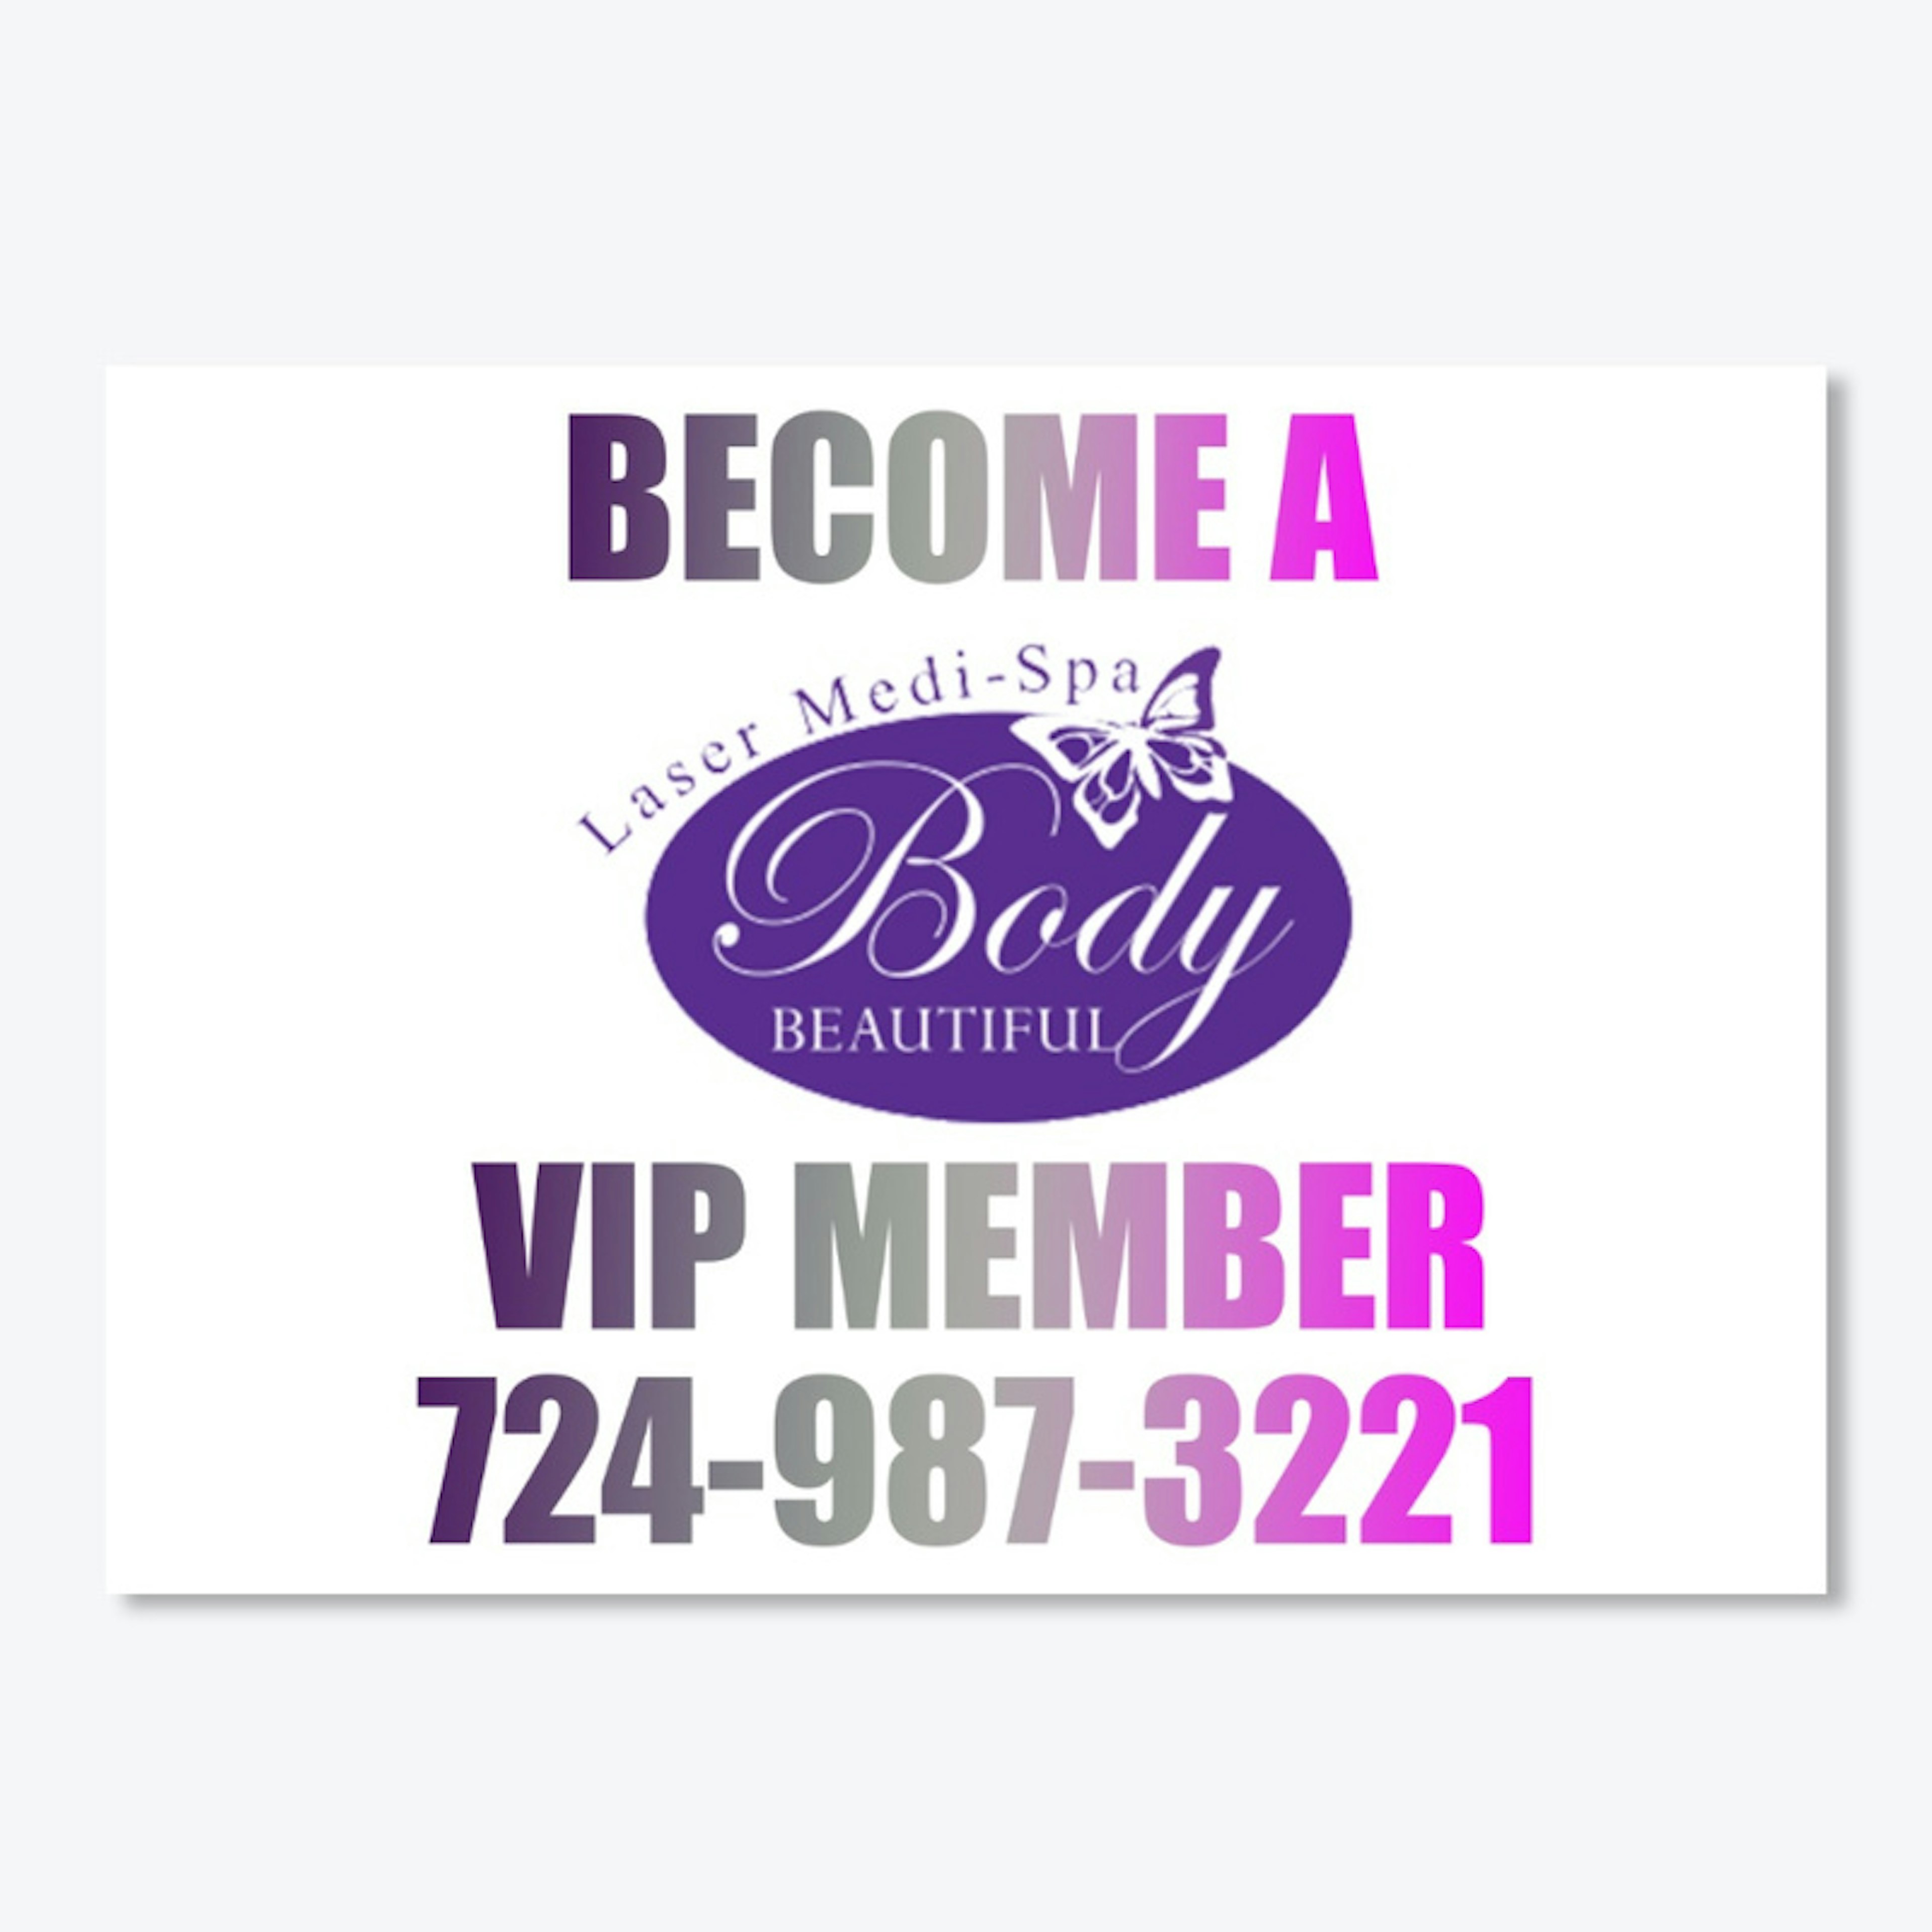 Become a VIP Member